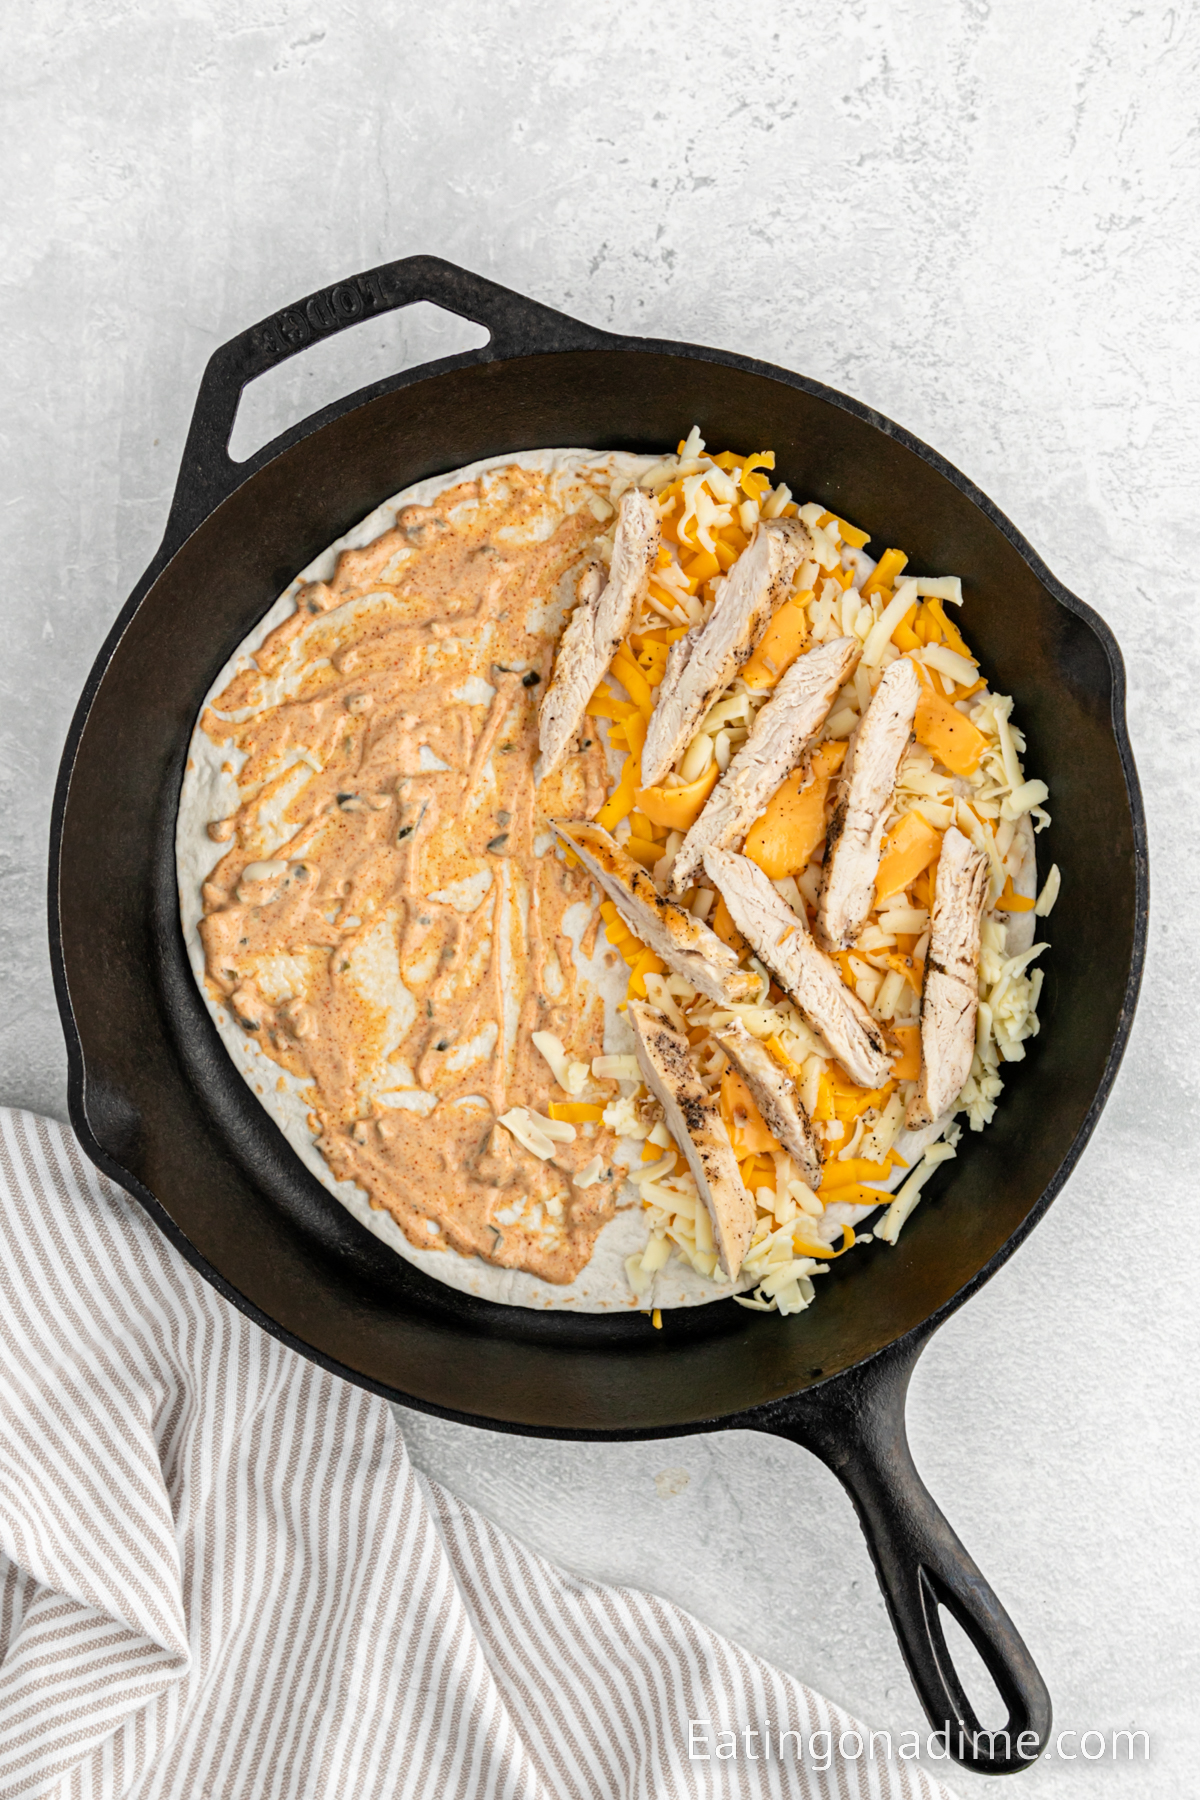 Topping a flour tortilla that is in the skillet with sauce, cheese and chicken